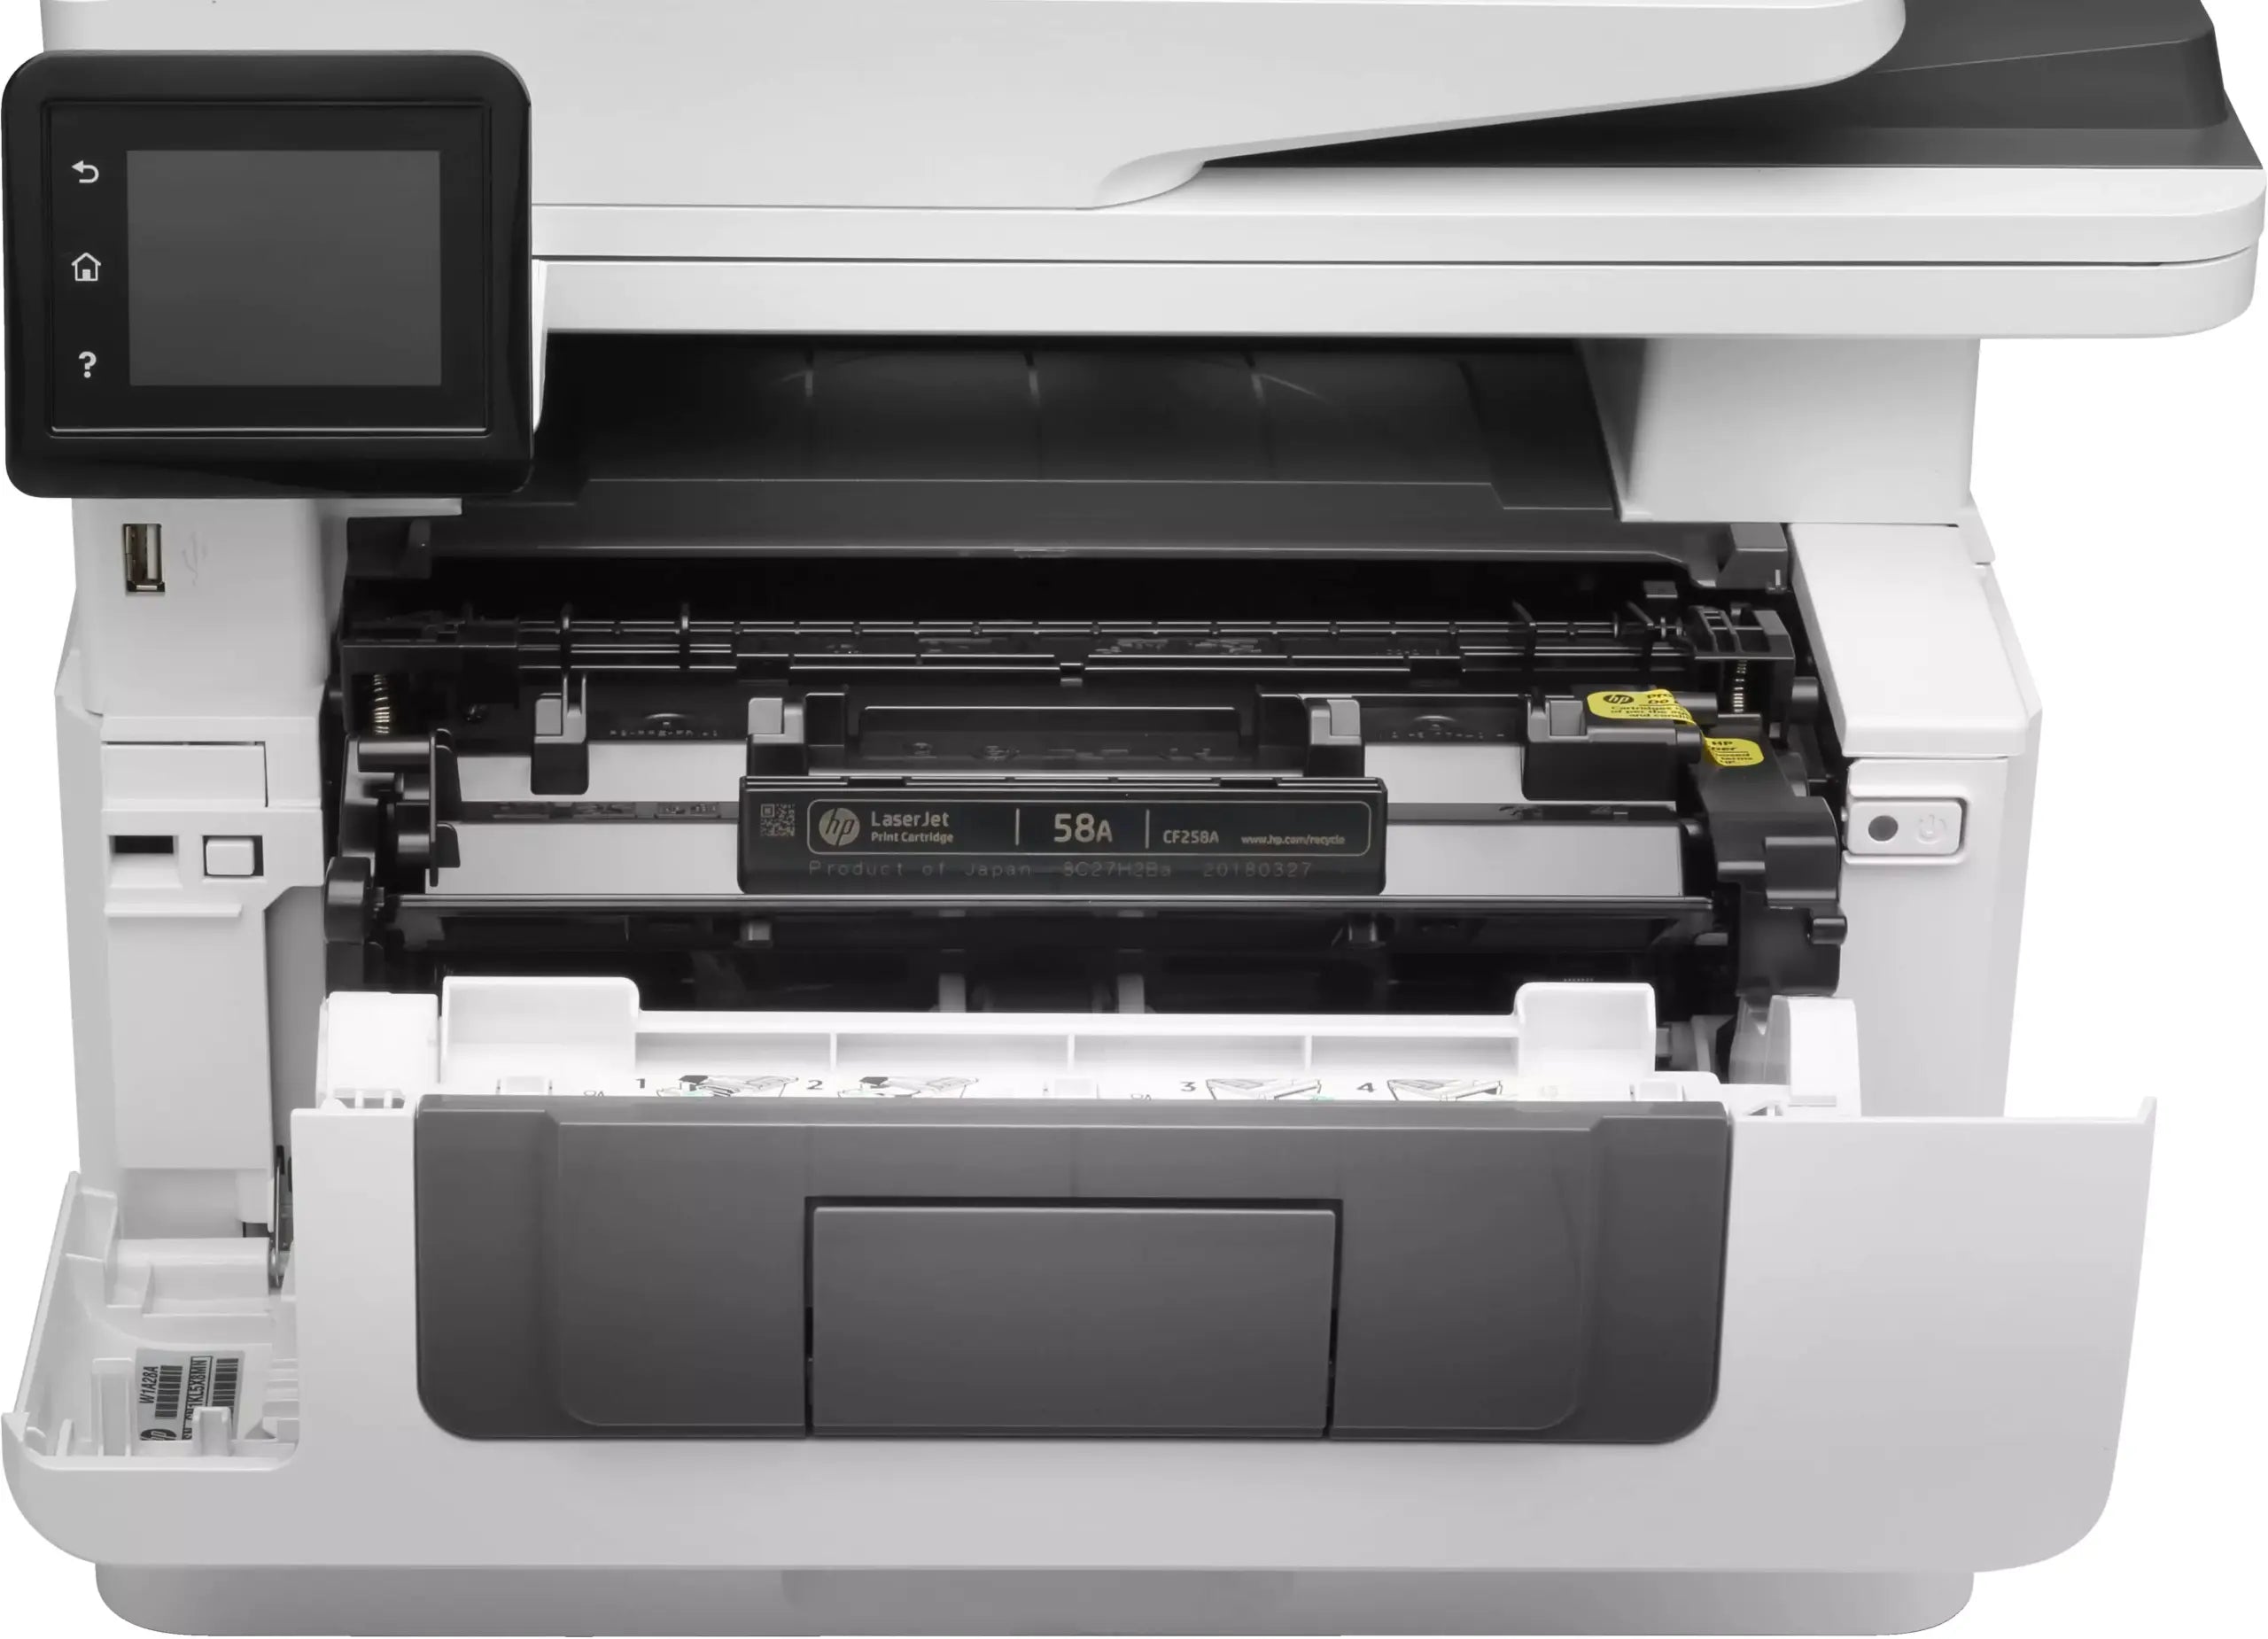 HP LaserJet Pro MFP M428fdn Multifunction A4 Black/White 1200DPI 38 ppm Fax Advanced Network perfect for Professionals NEW product